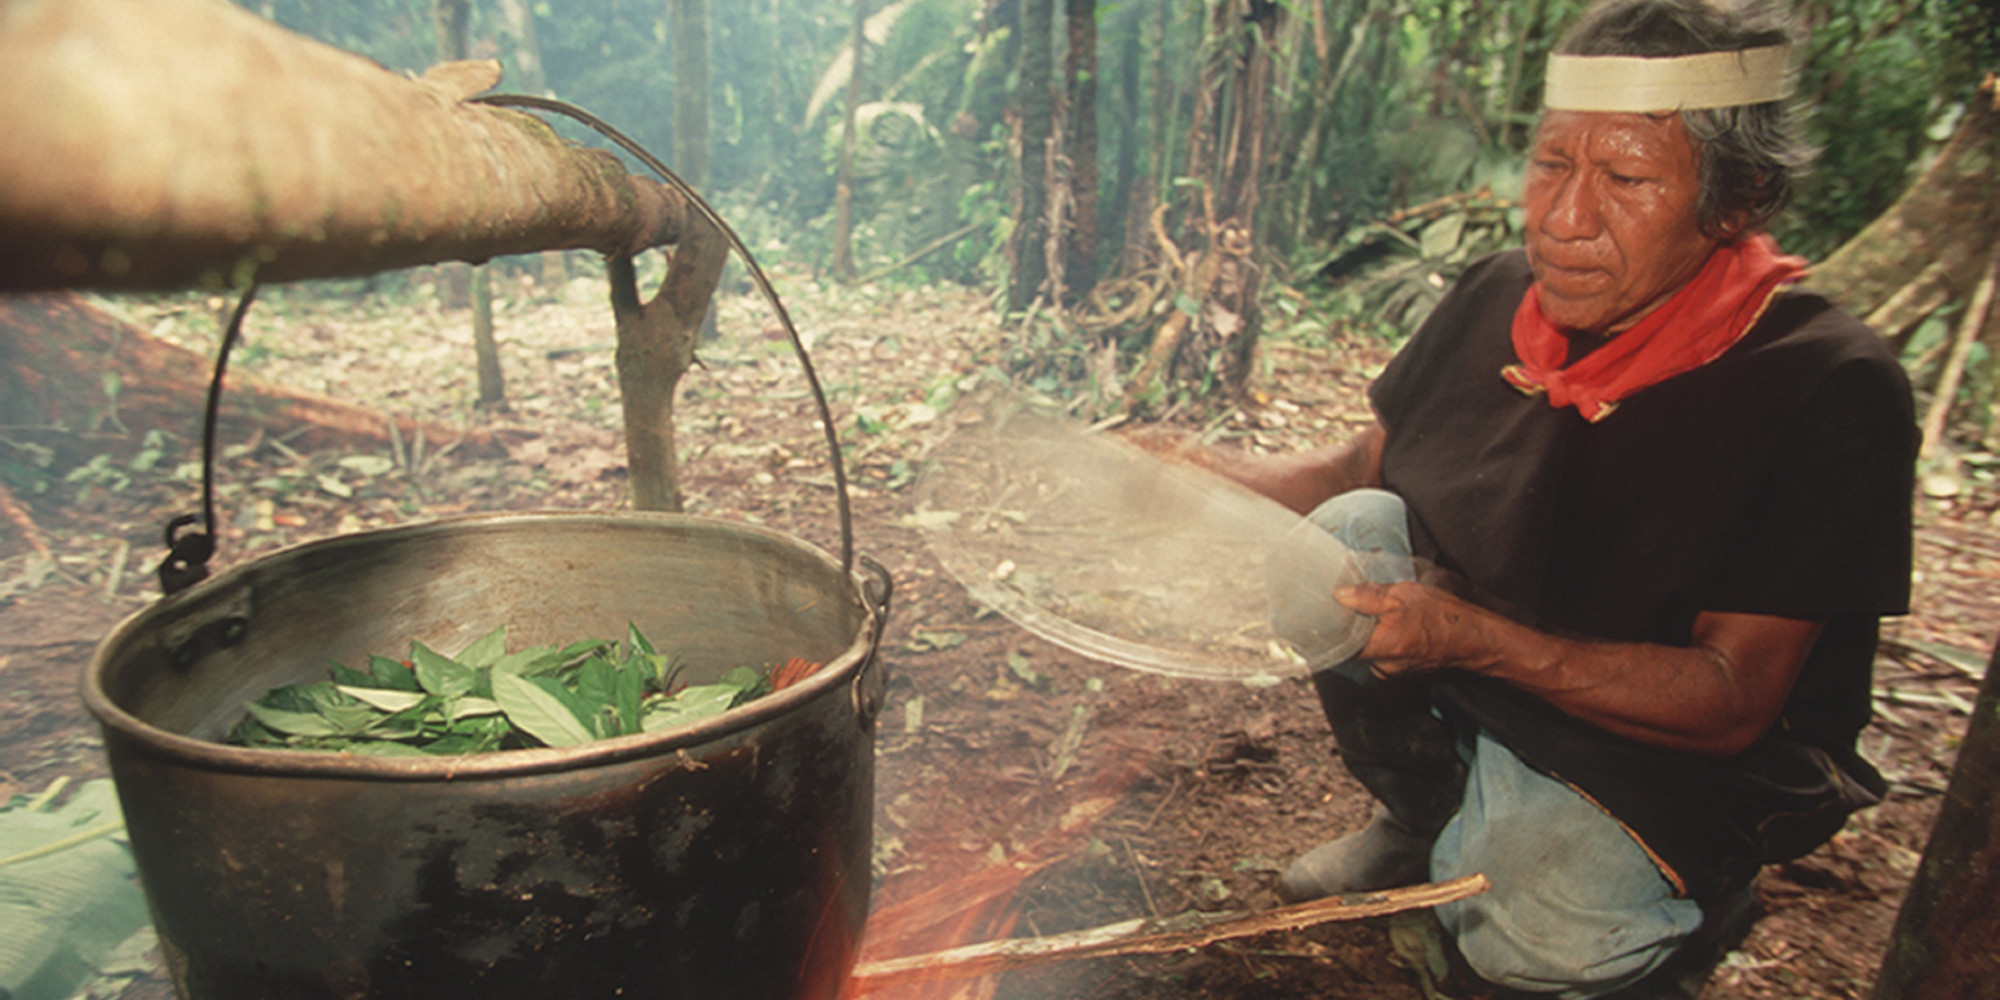 A shaman in the Coafan region boils leaves for their psychoactive proporties as used in ayahuasca, Ecuador, 2009. (Photo by Wade Davis/Getty Images)